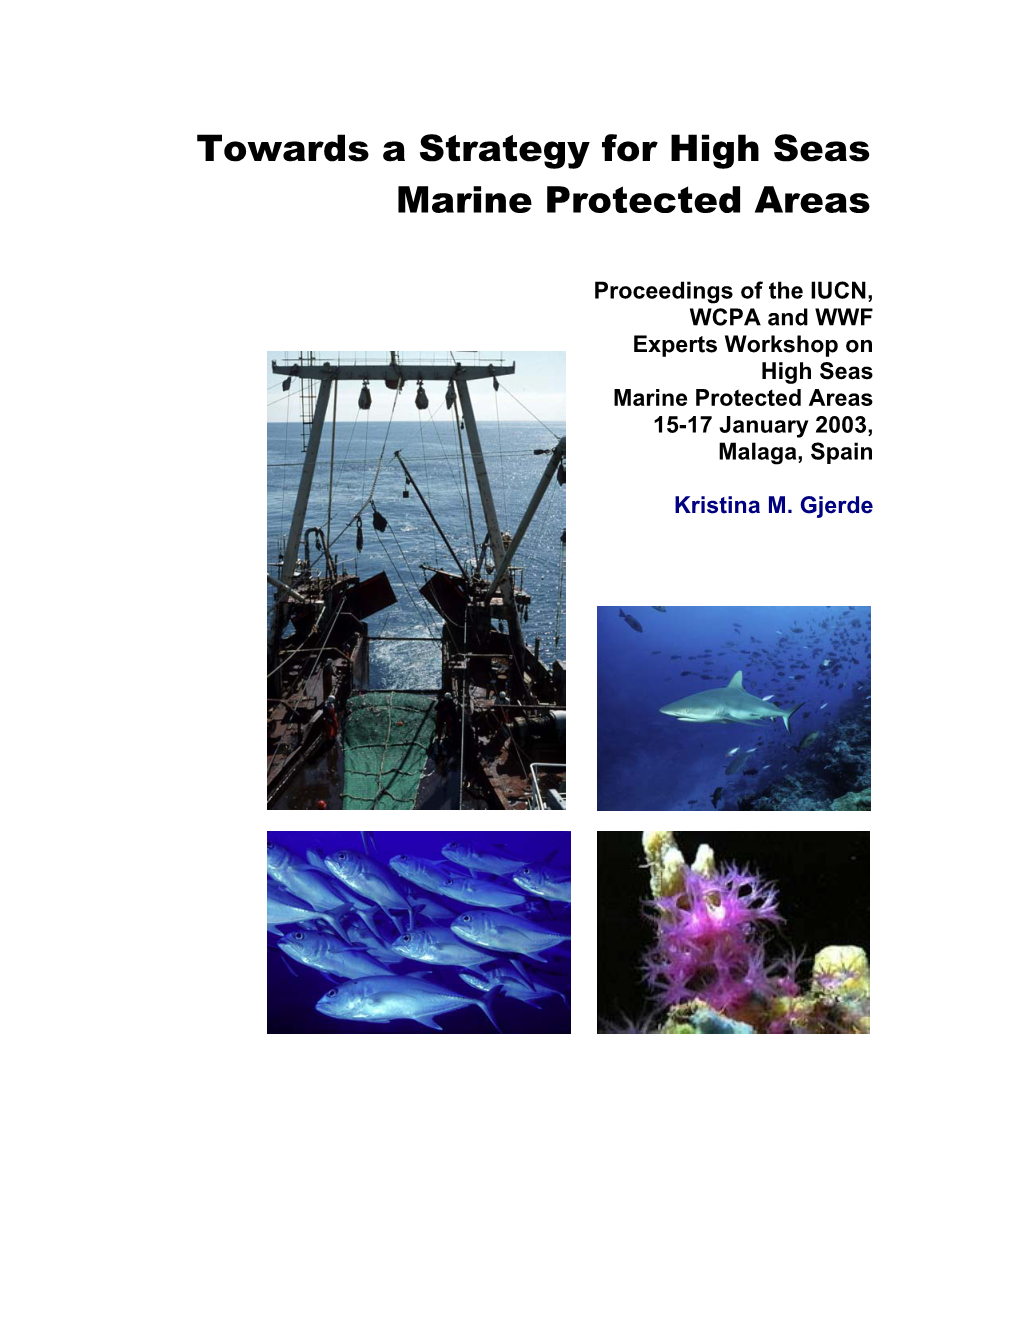 Towards a Strategy for High Seas Marine Protected Areas